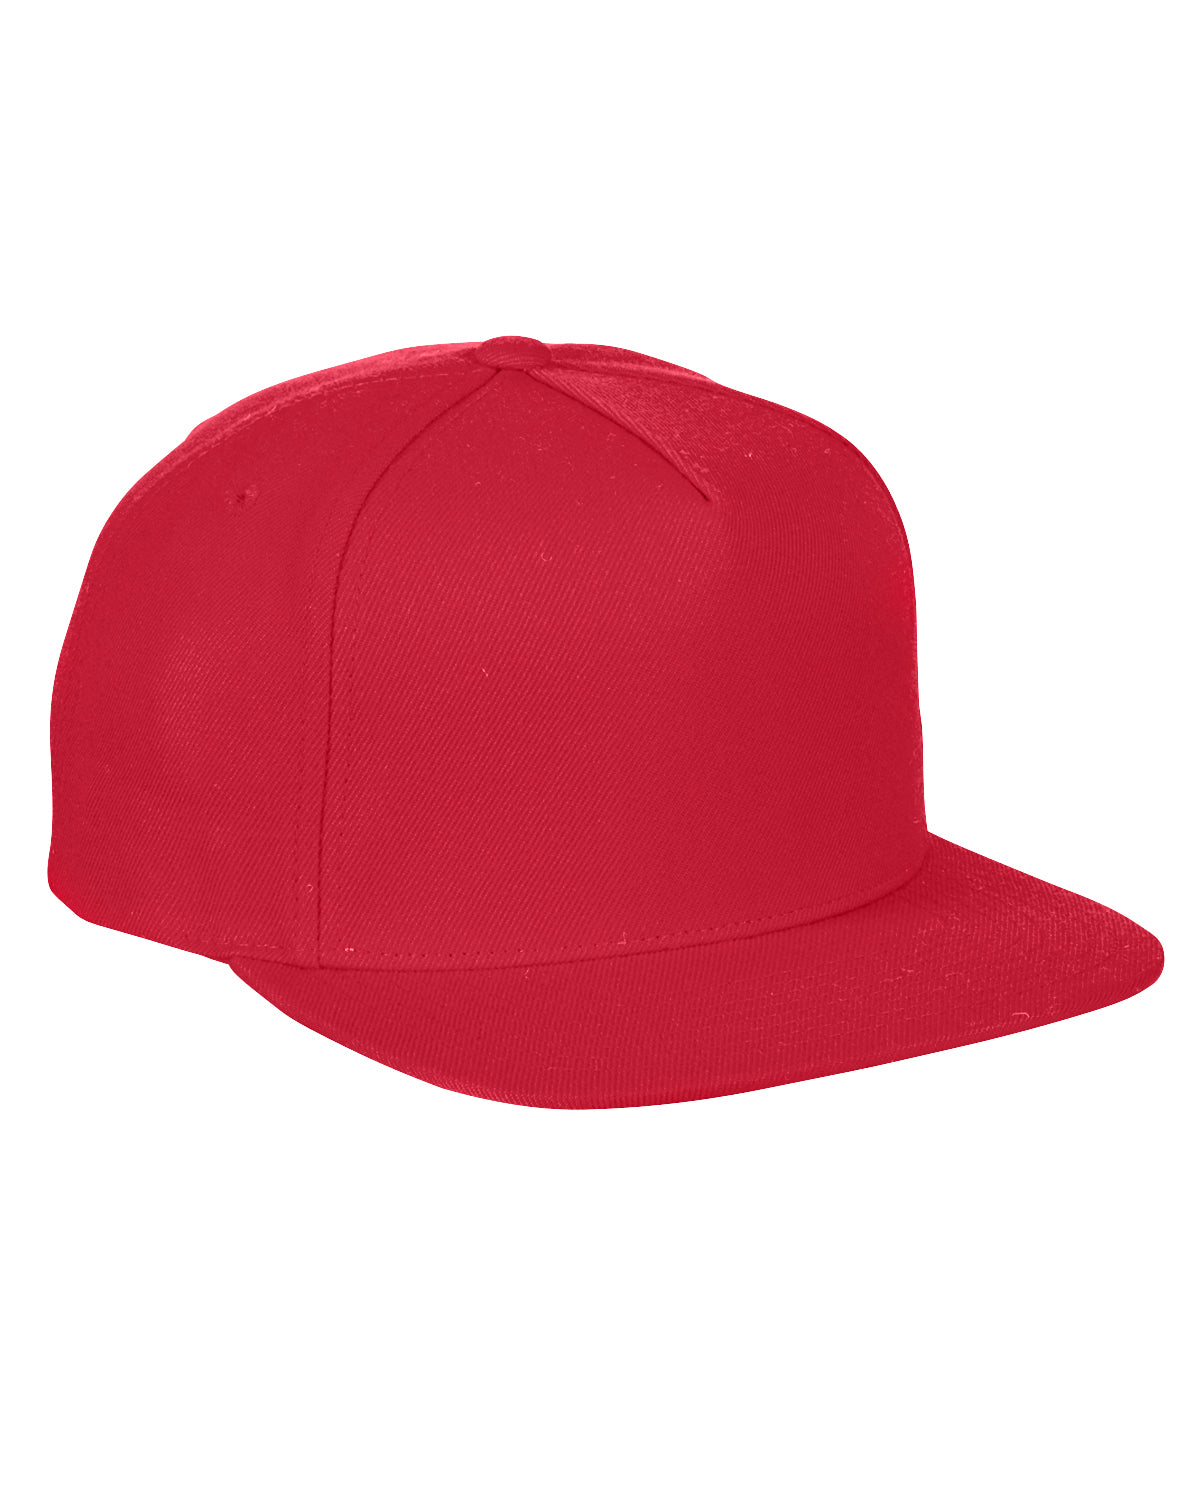 Cheap Affordable Custom Hats Caps Custom Leather and Wood Patches Engraved With Your Logo Hats Black Yupoong Red